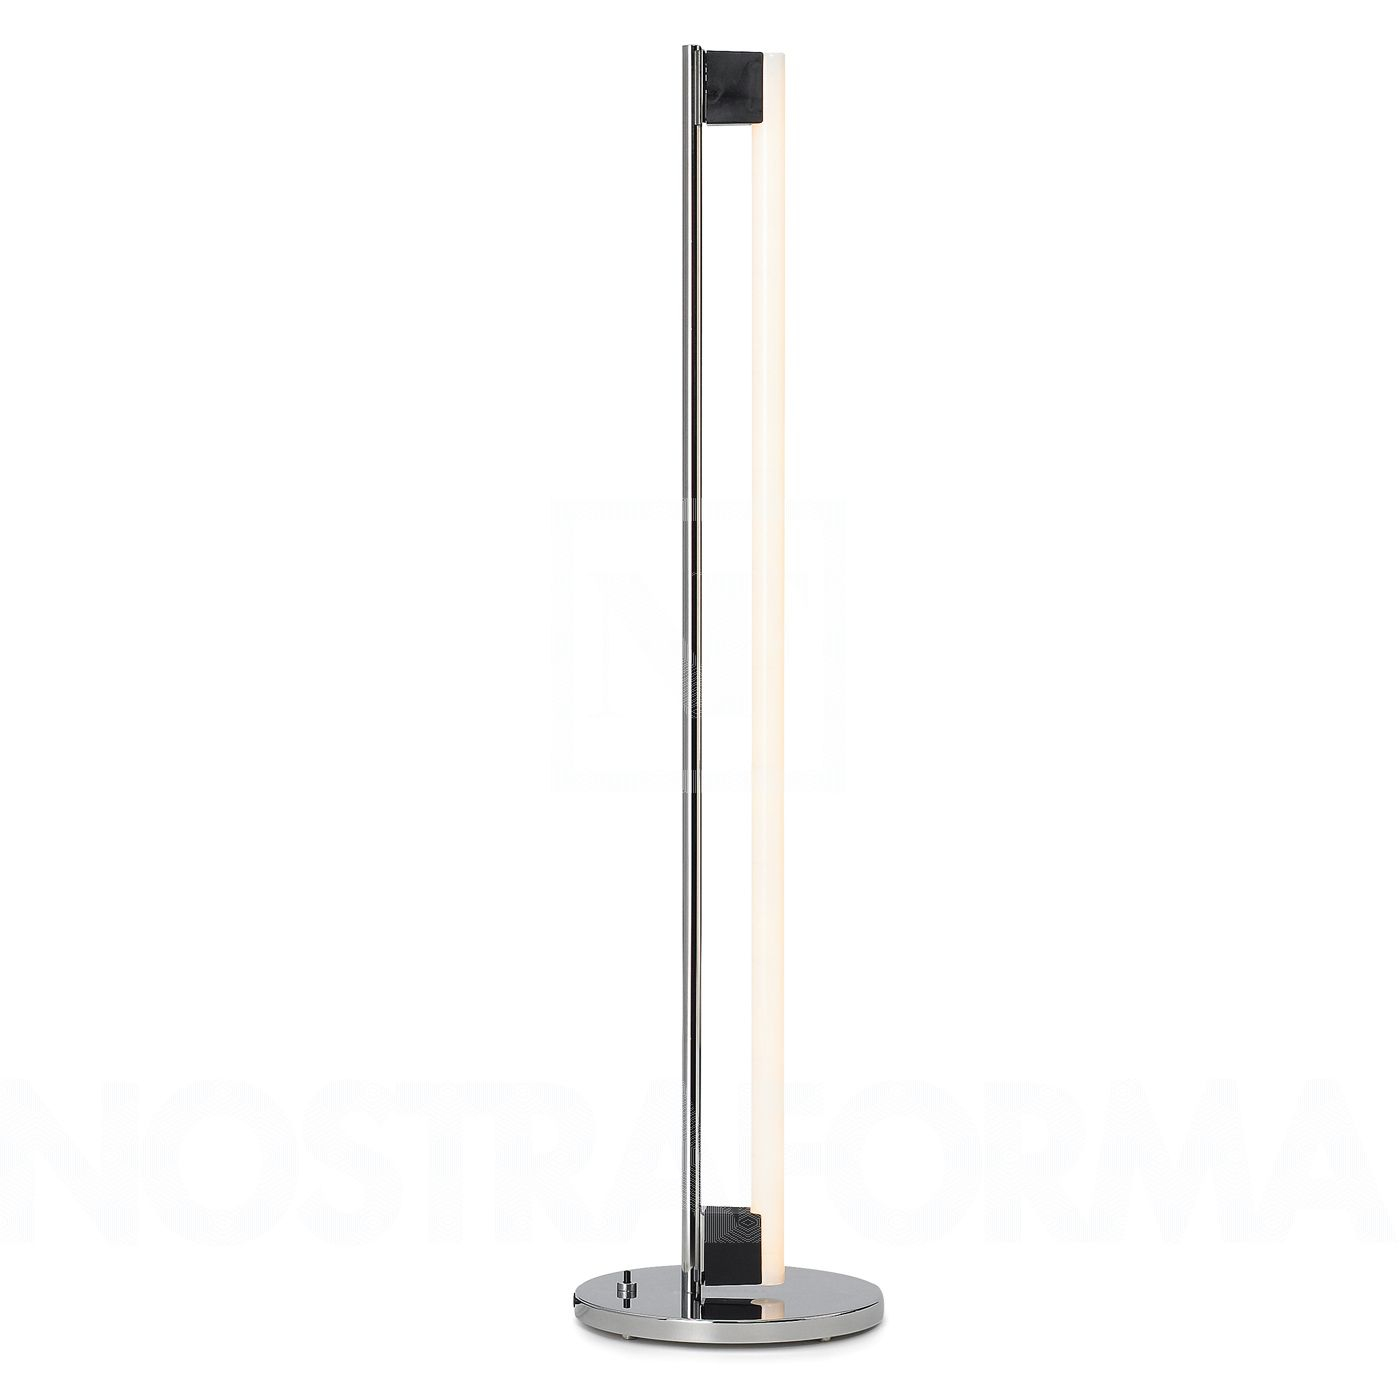 Classicon Tube Light Floor Lamp At Nostraforma We Love Design with size 1400 X 1400